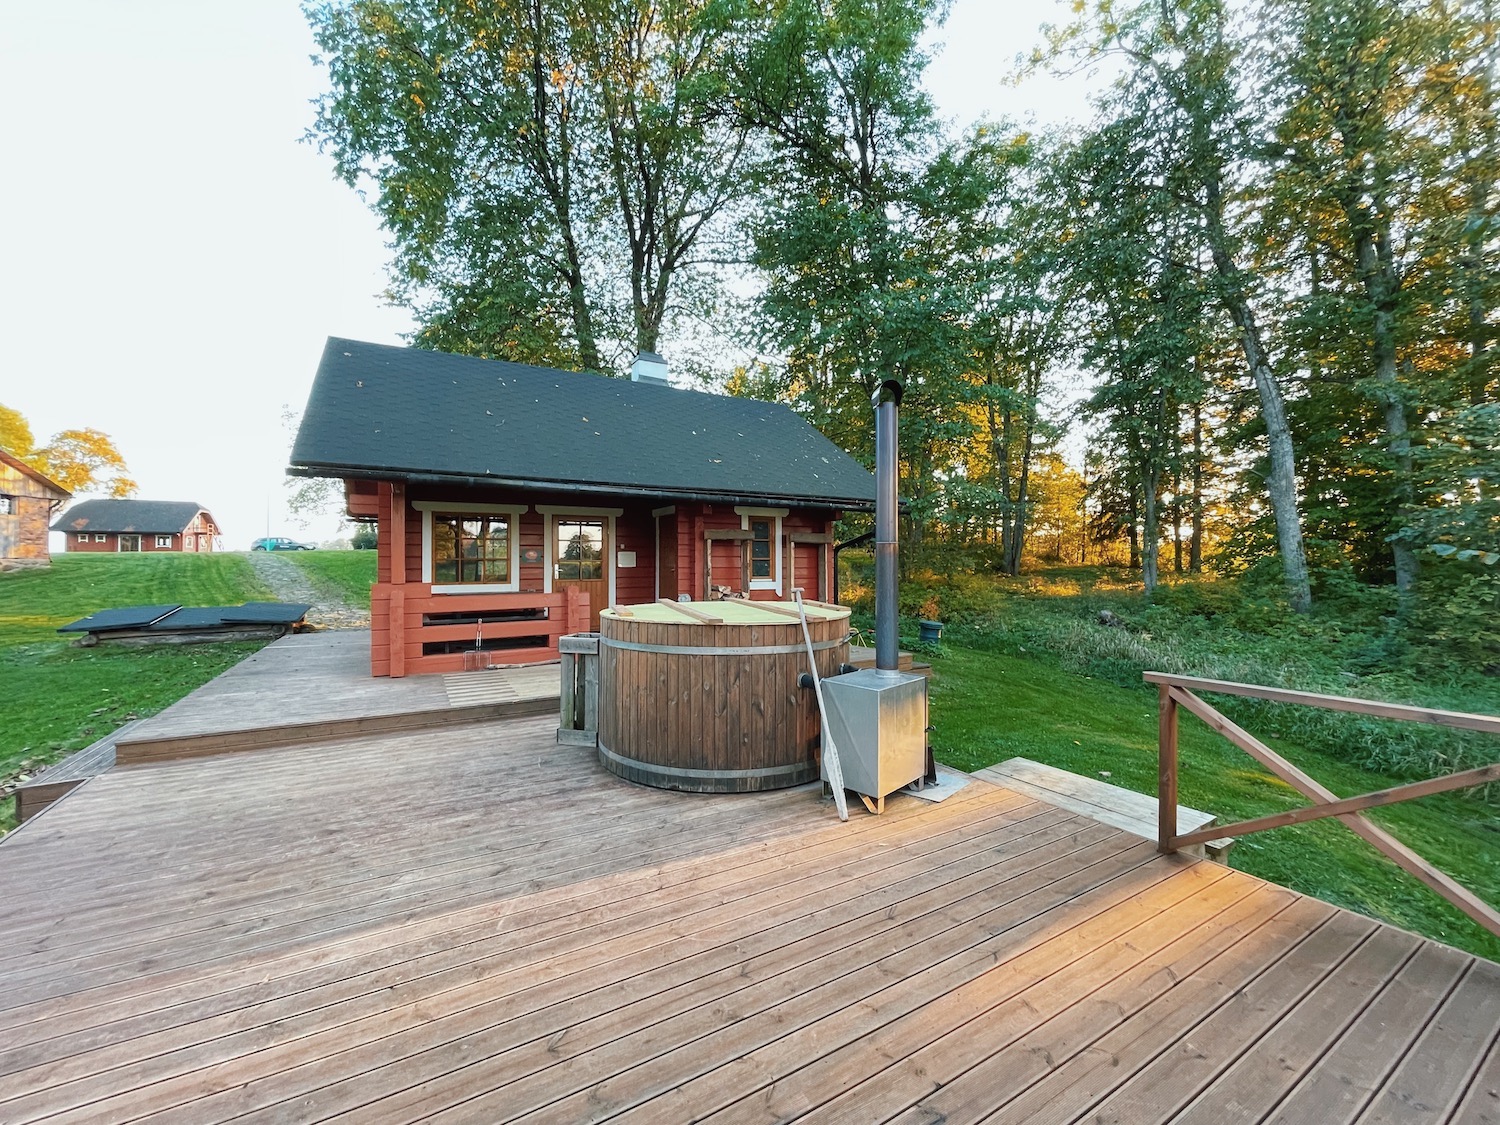 The best holiday homes in Estonia for hosting events, Junsi holiday center in Viljandi county, Eesti Paigad